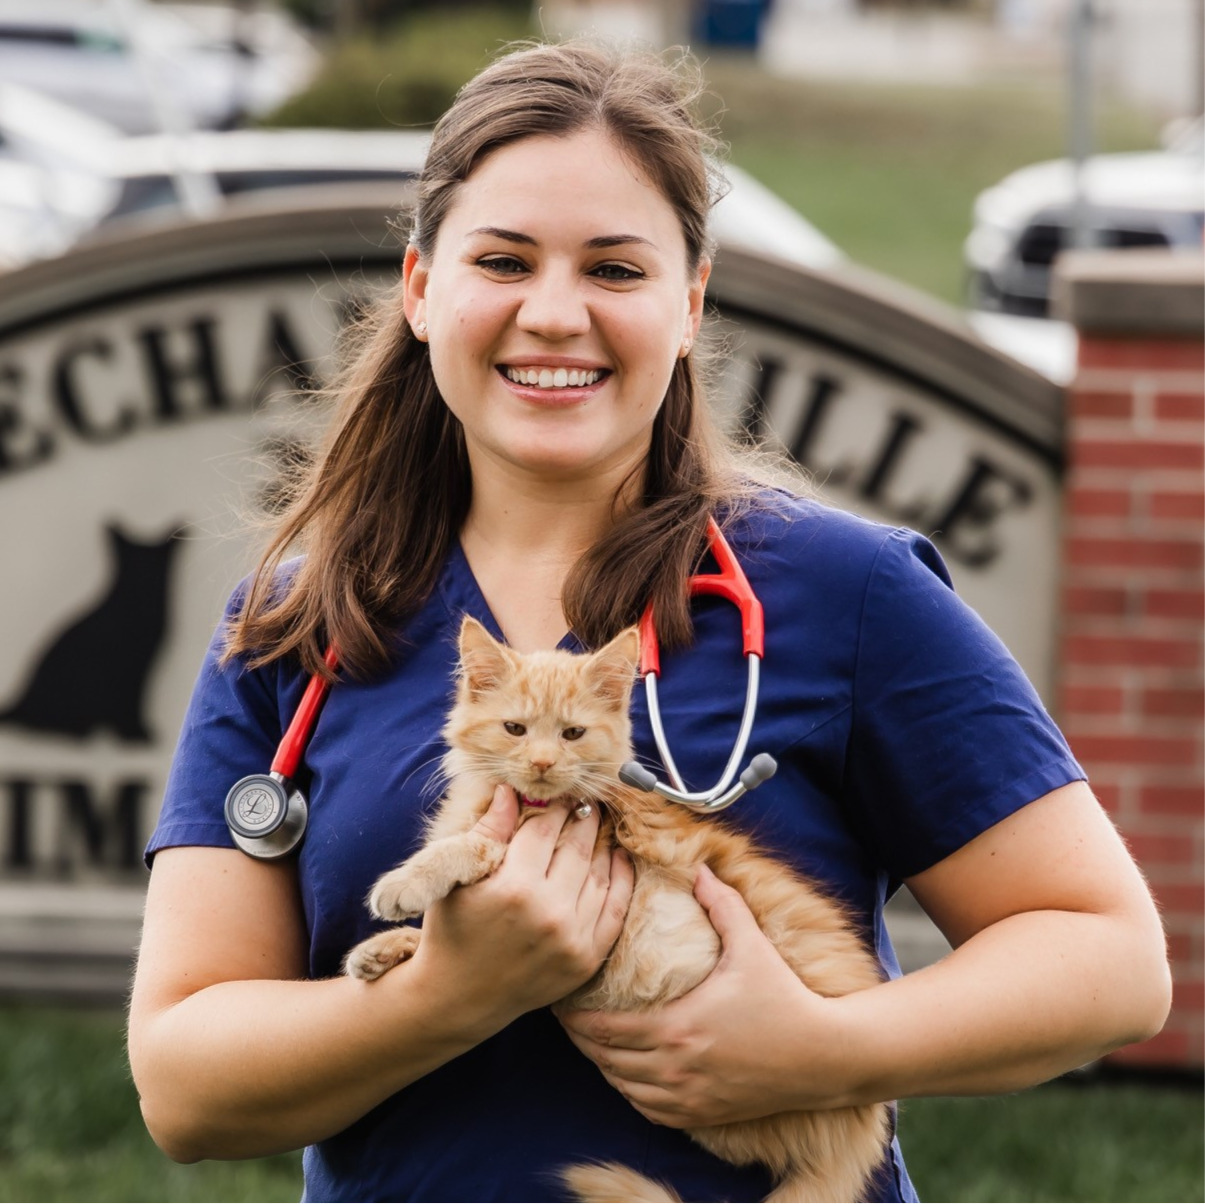 Mechanicsville Animal Hospital provides quality veterinary care for your  pets in Hanover County, VA. | Mechanicsville Animal Hospital